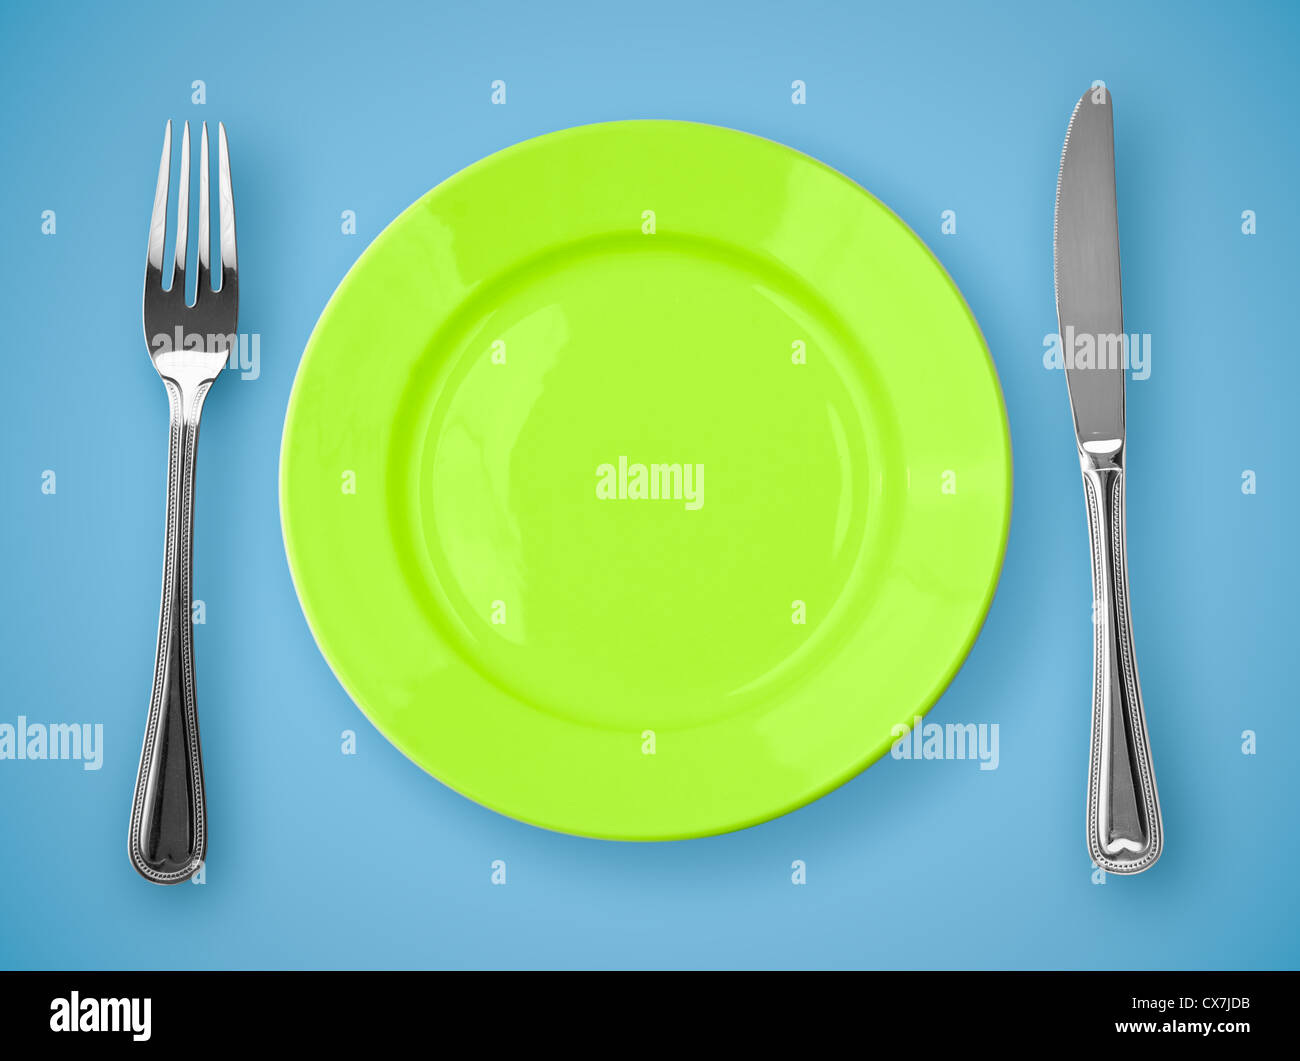 Knife, green plate and fork Stock Photo